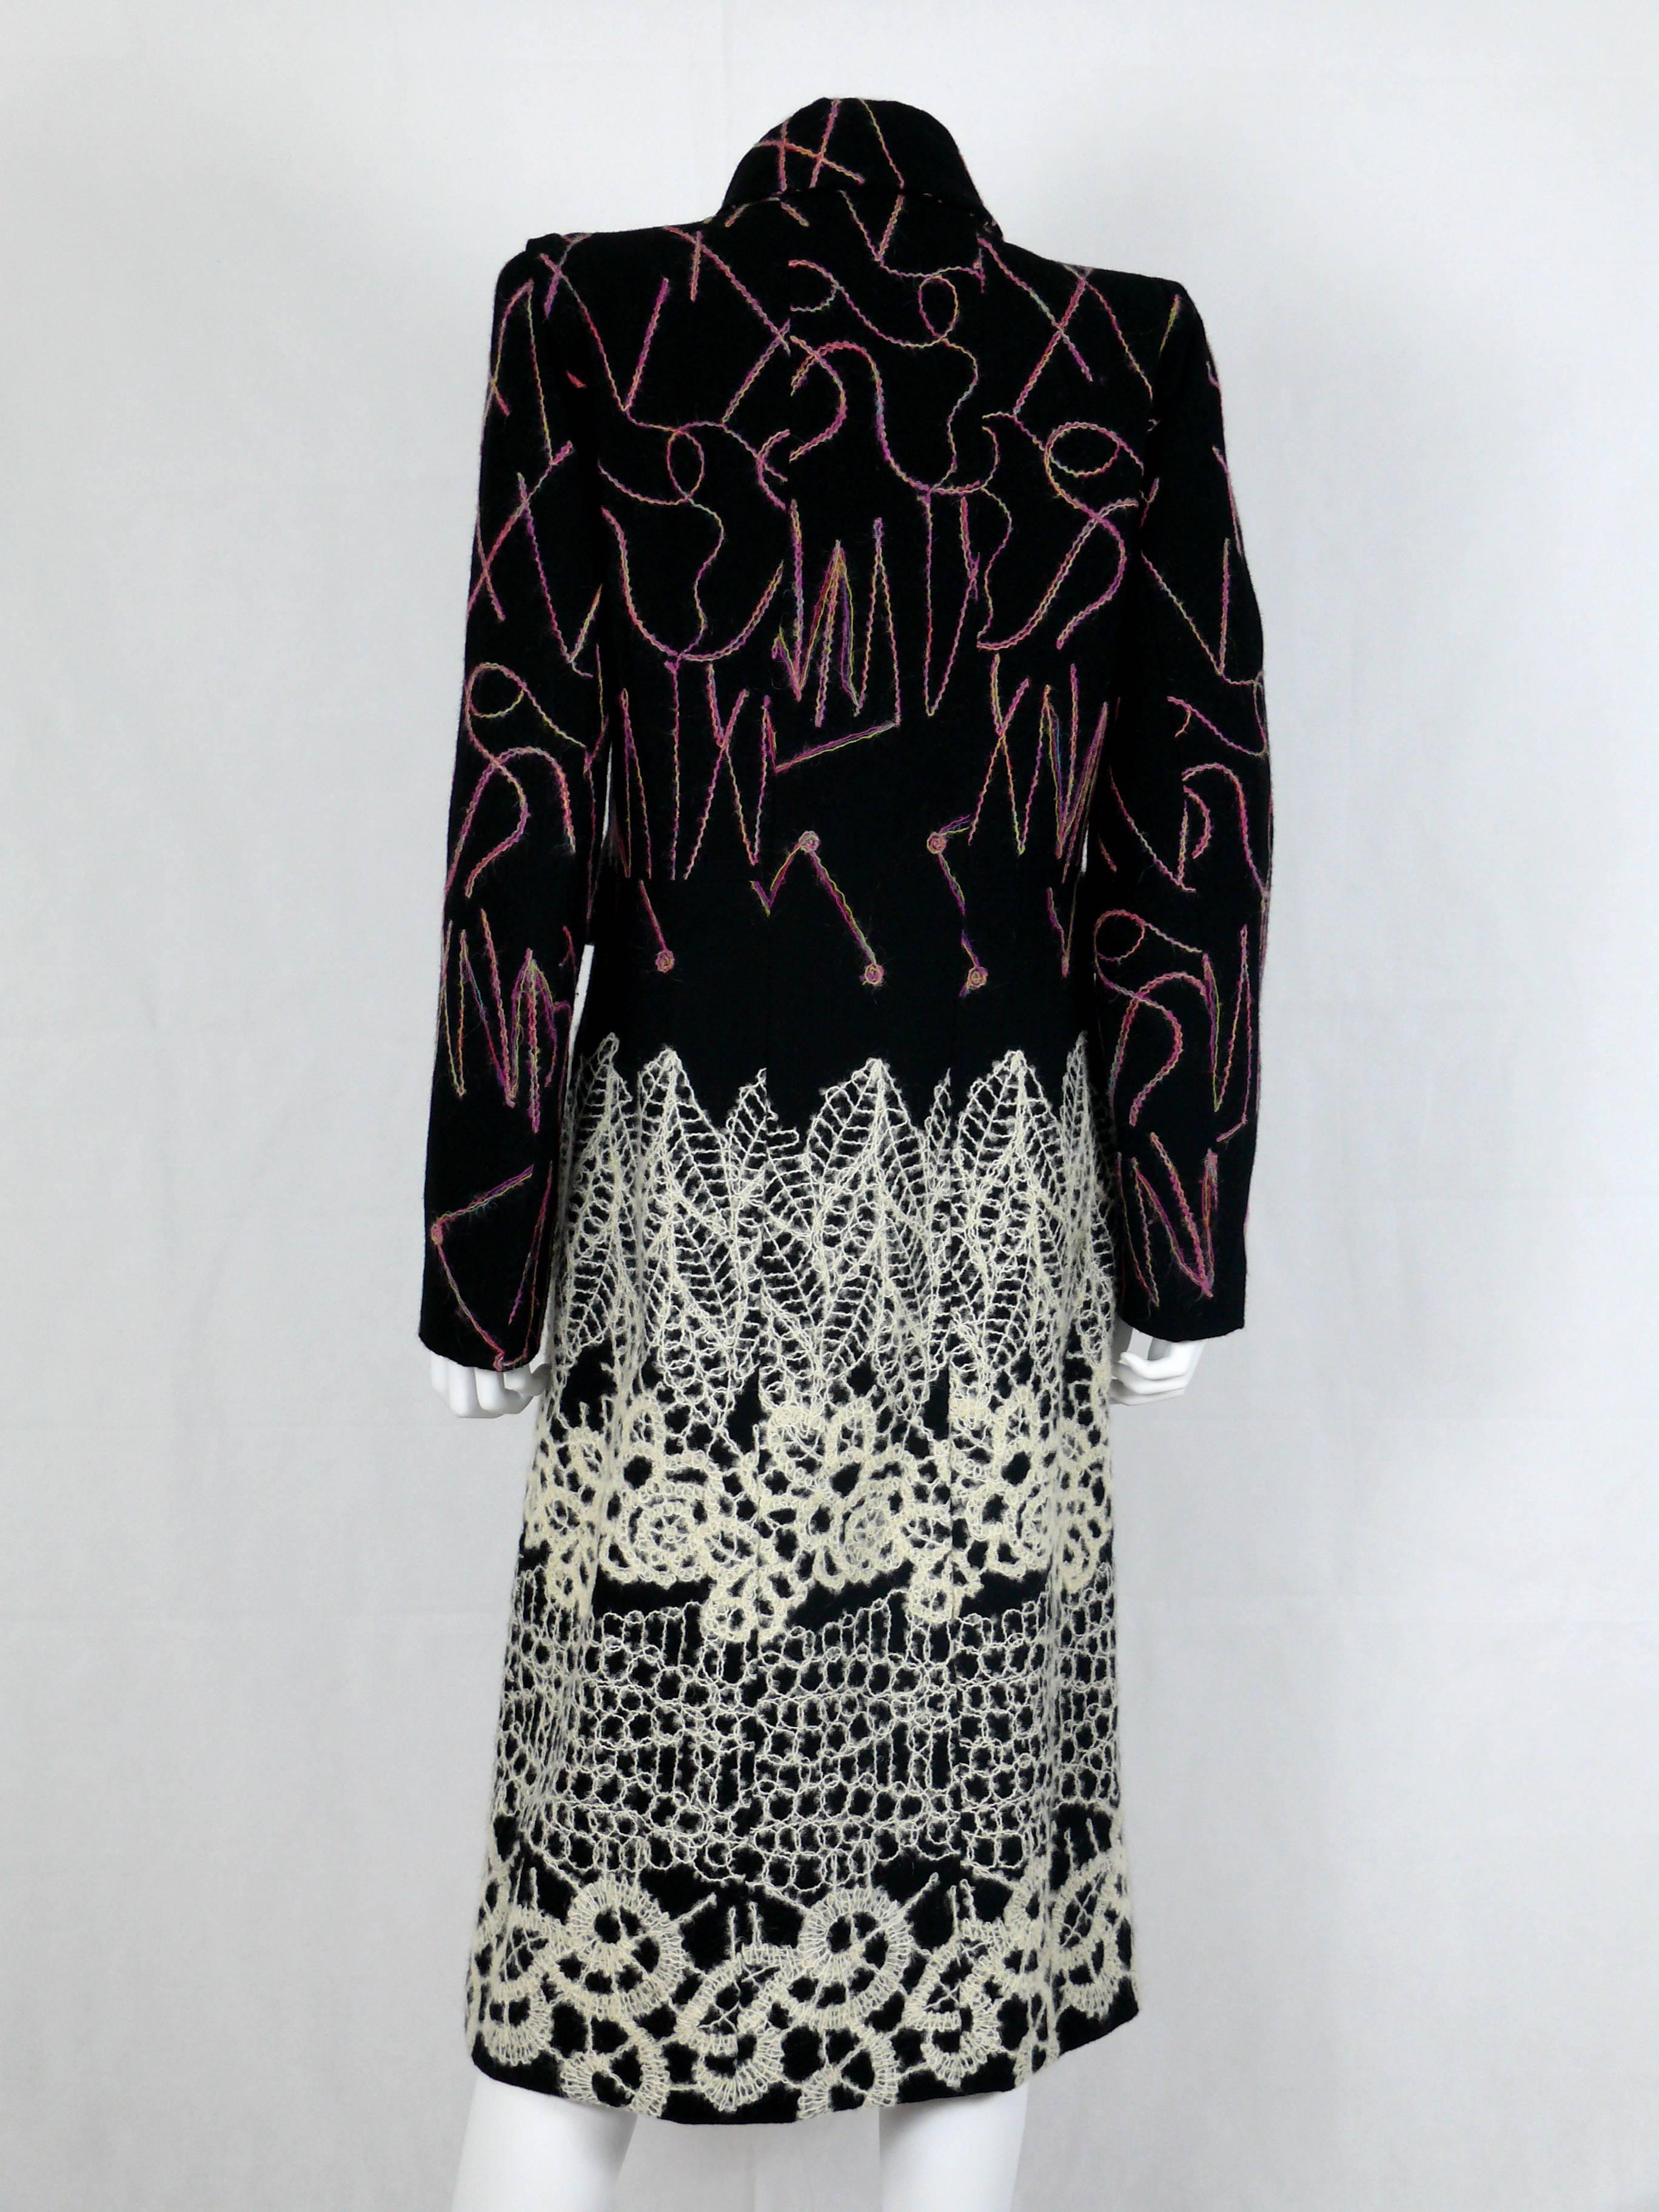 Black Christian Lacroix Vintage Wool Blend Coat with Appliqué and Embroideries